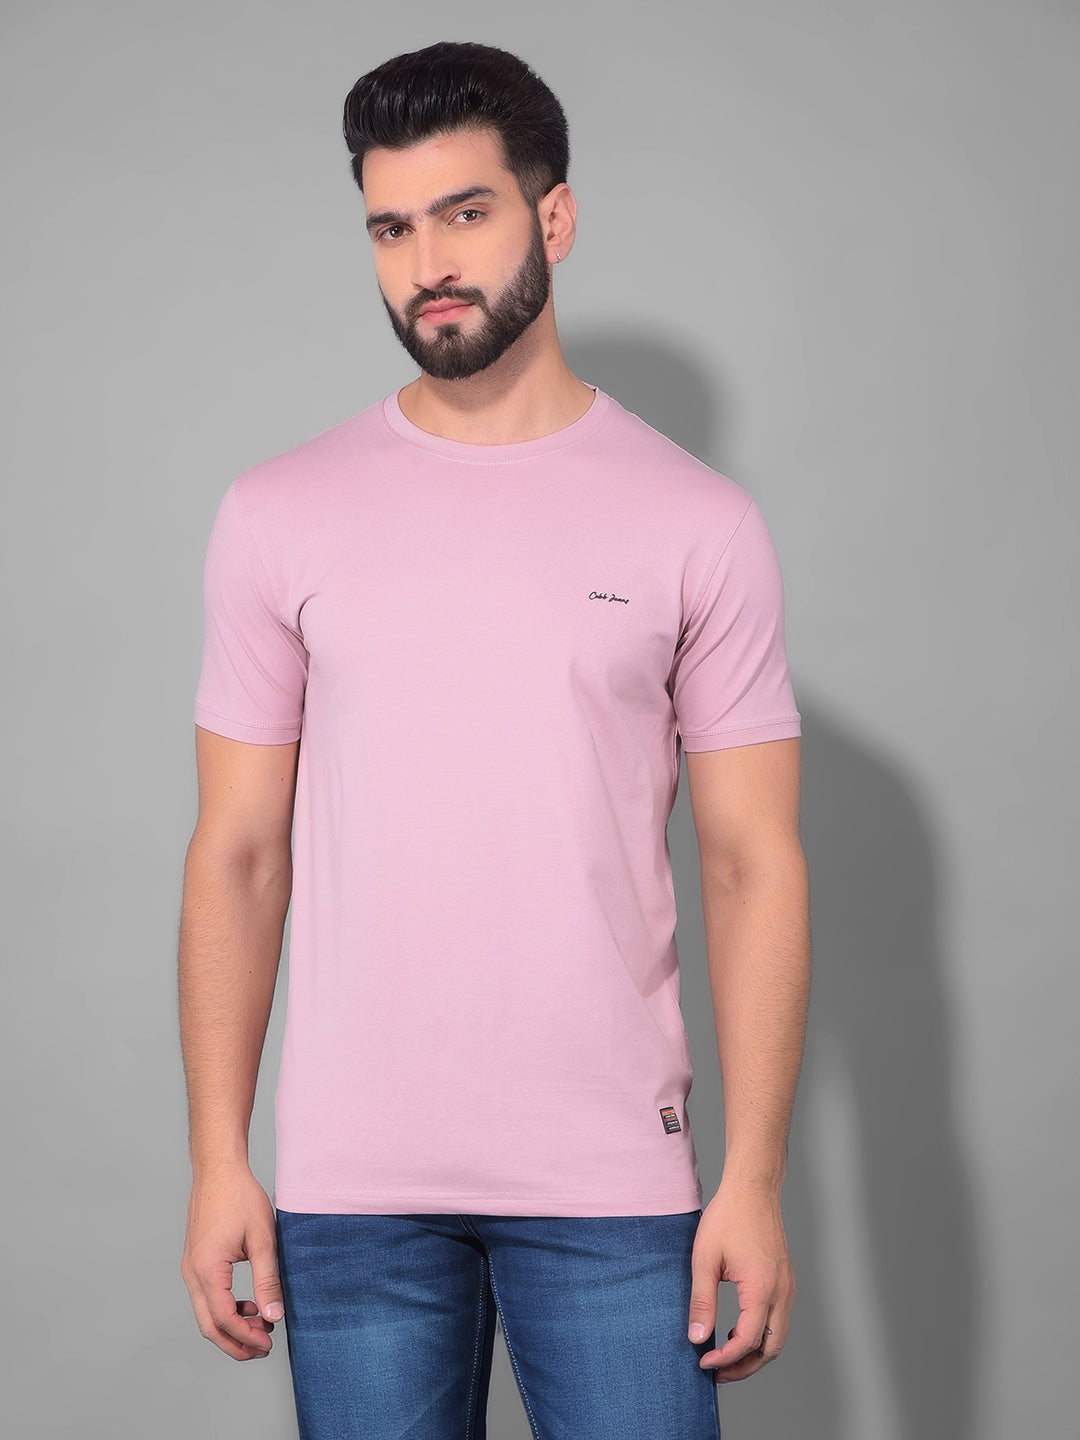 cobb solid crepe pink round neck t-shirt